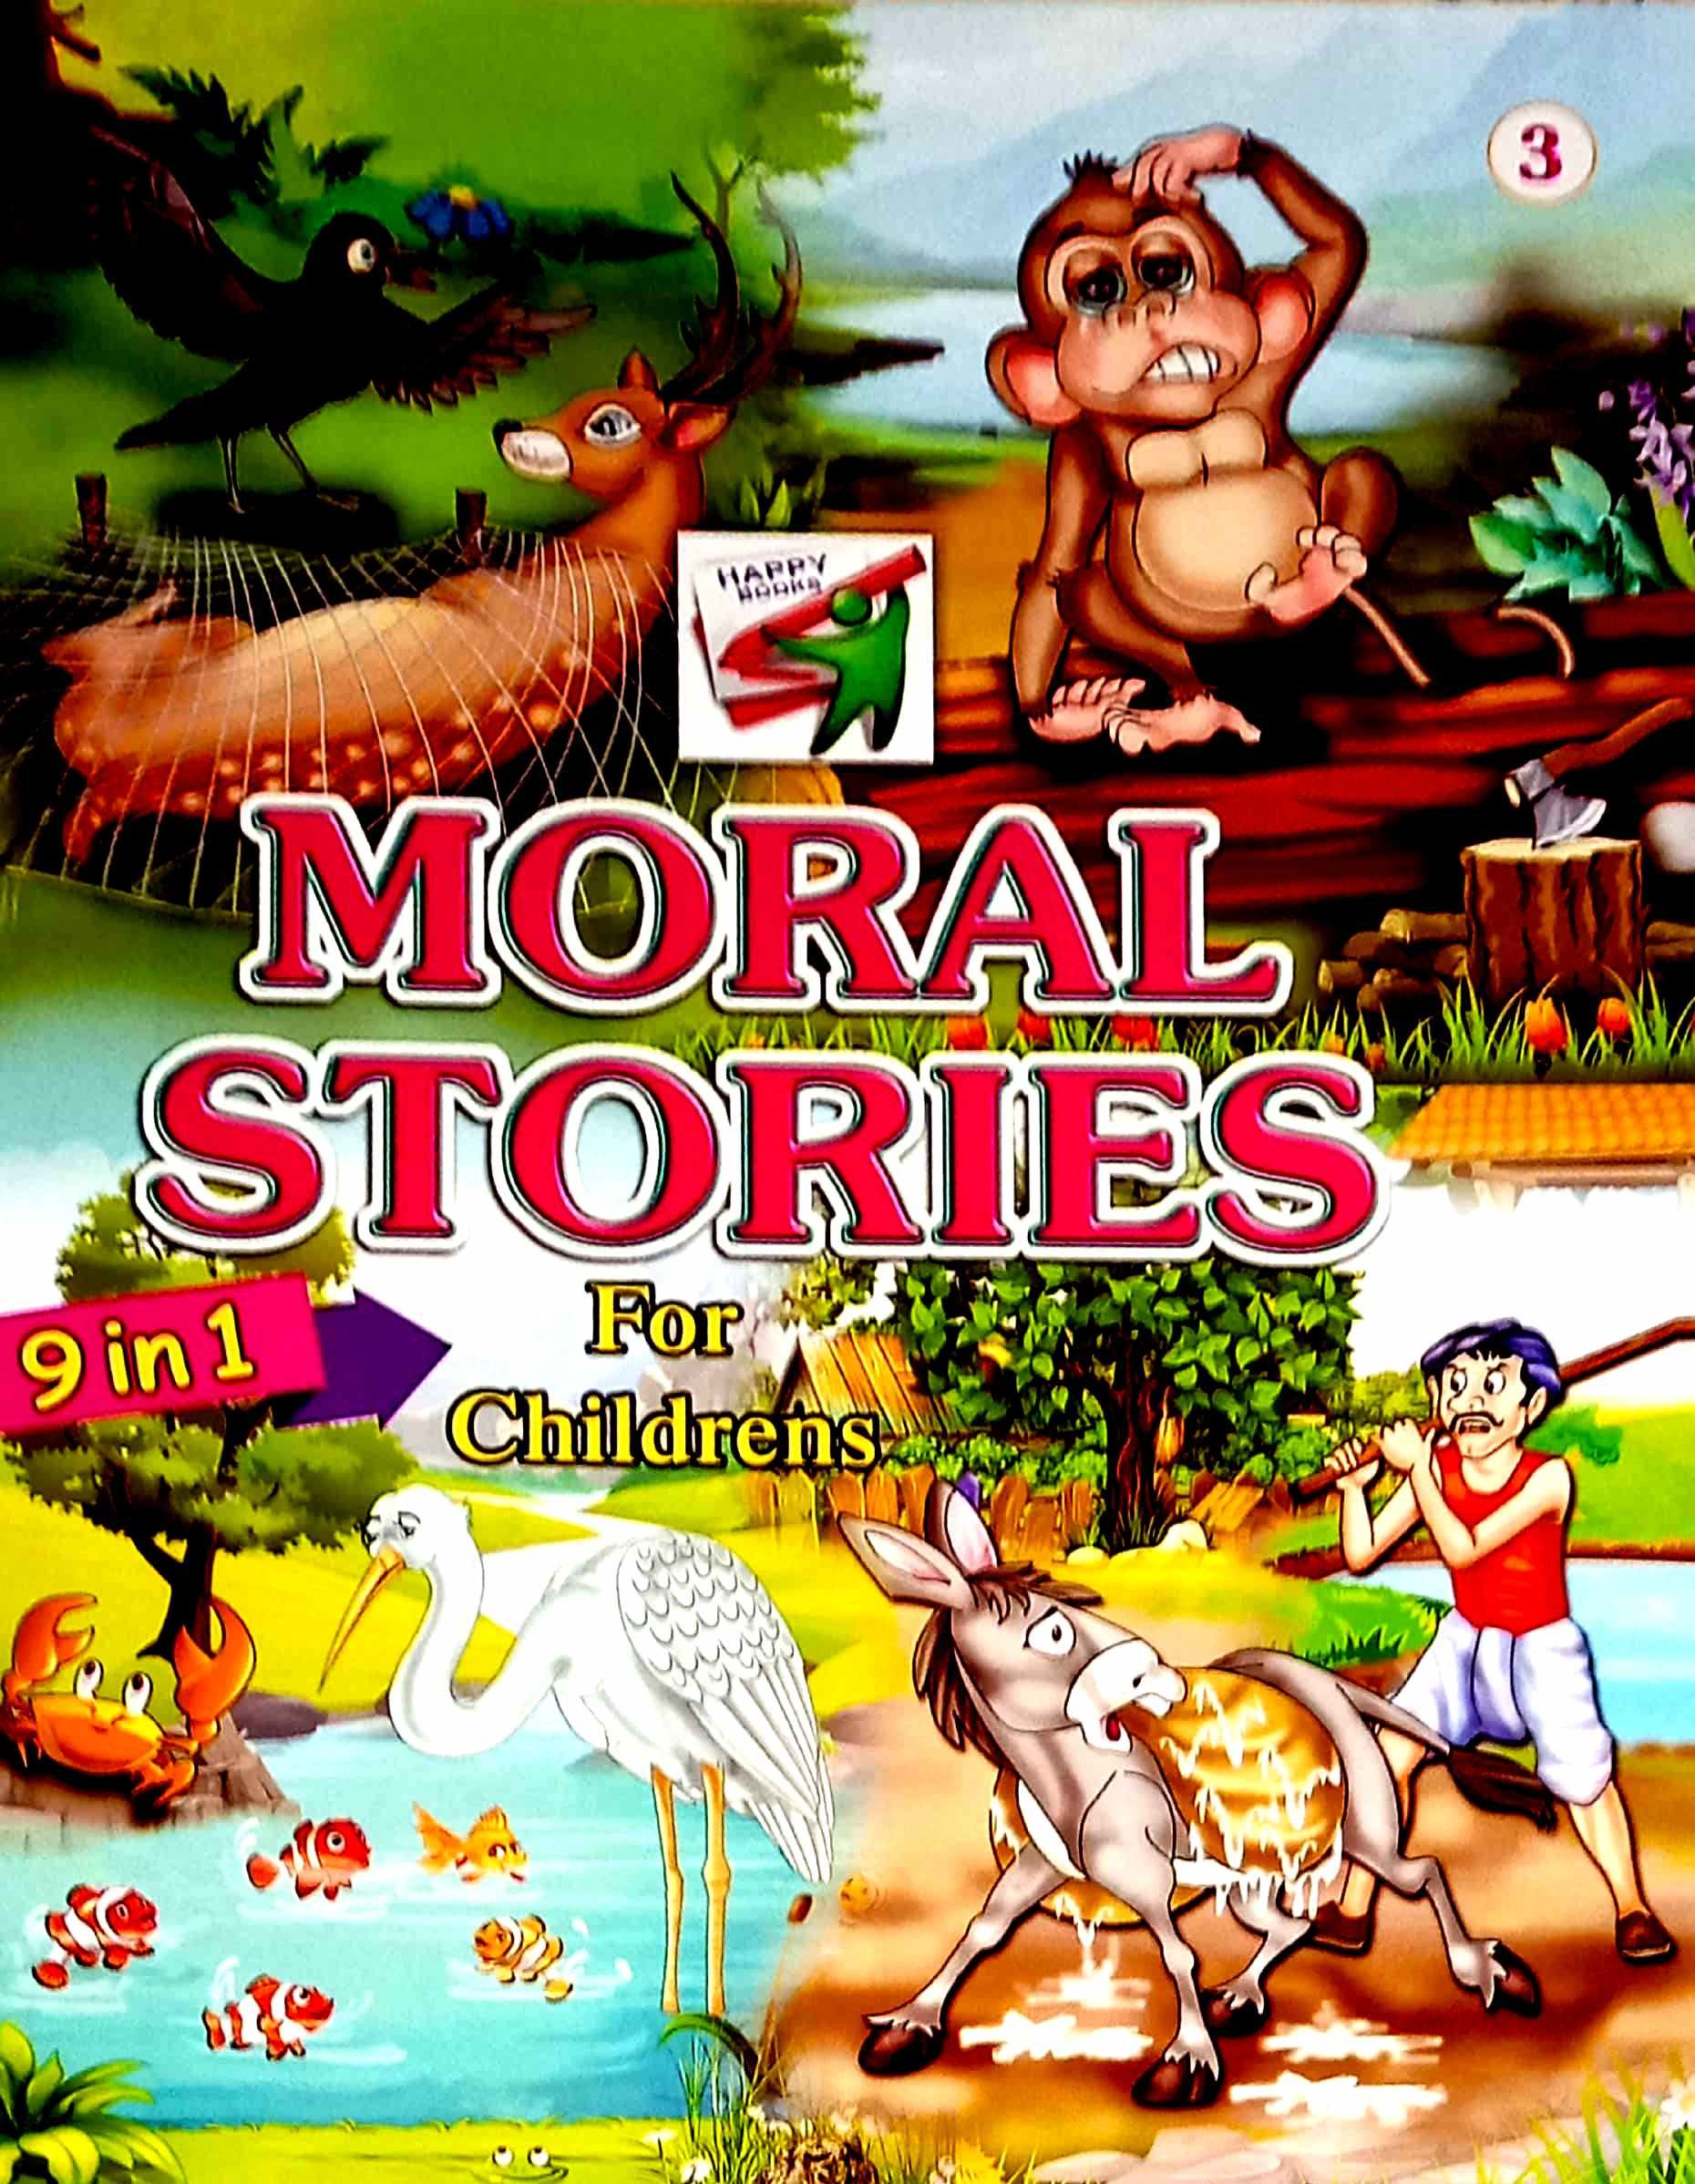 moral stories book review